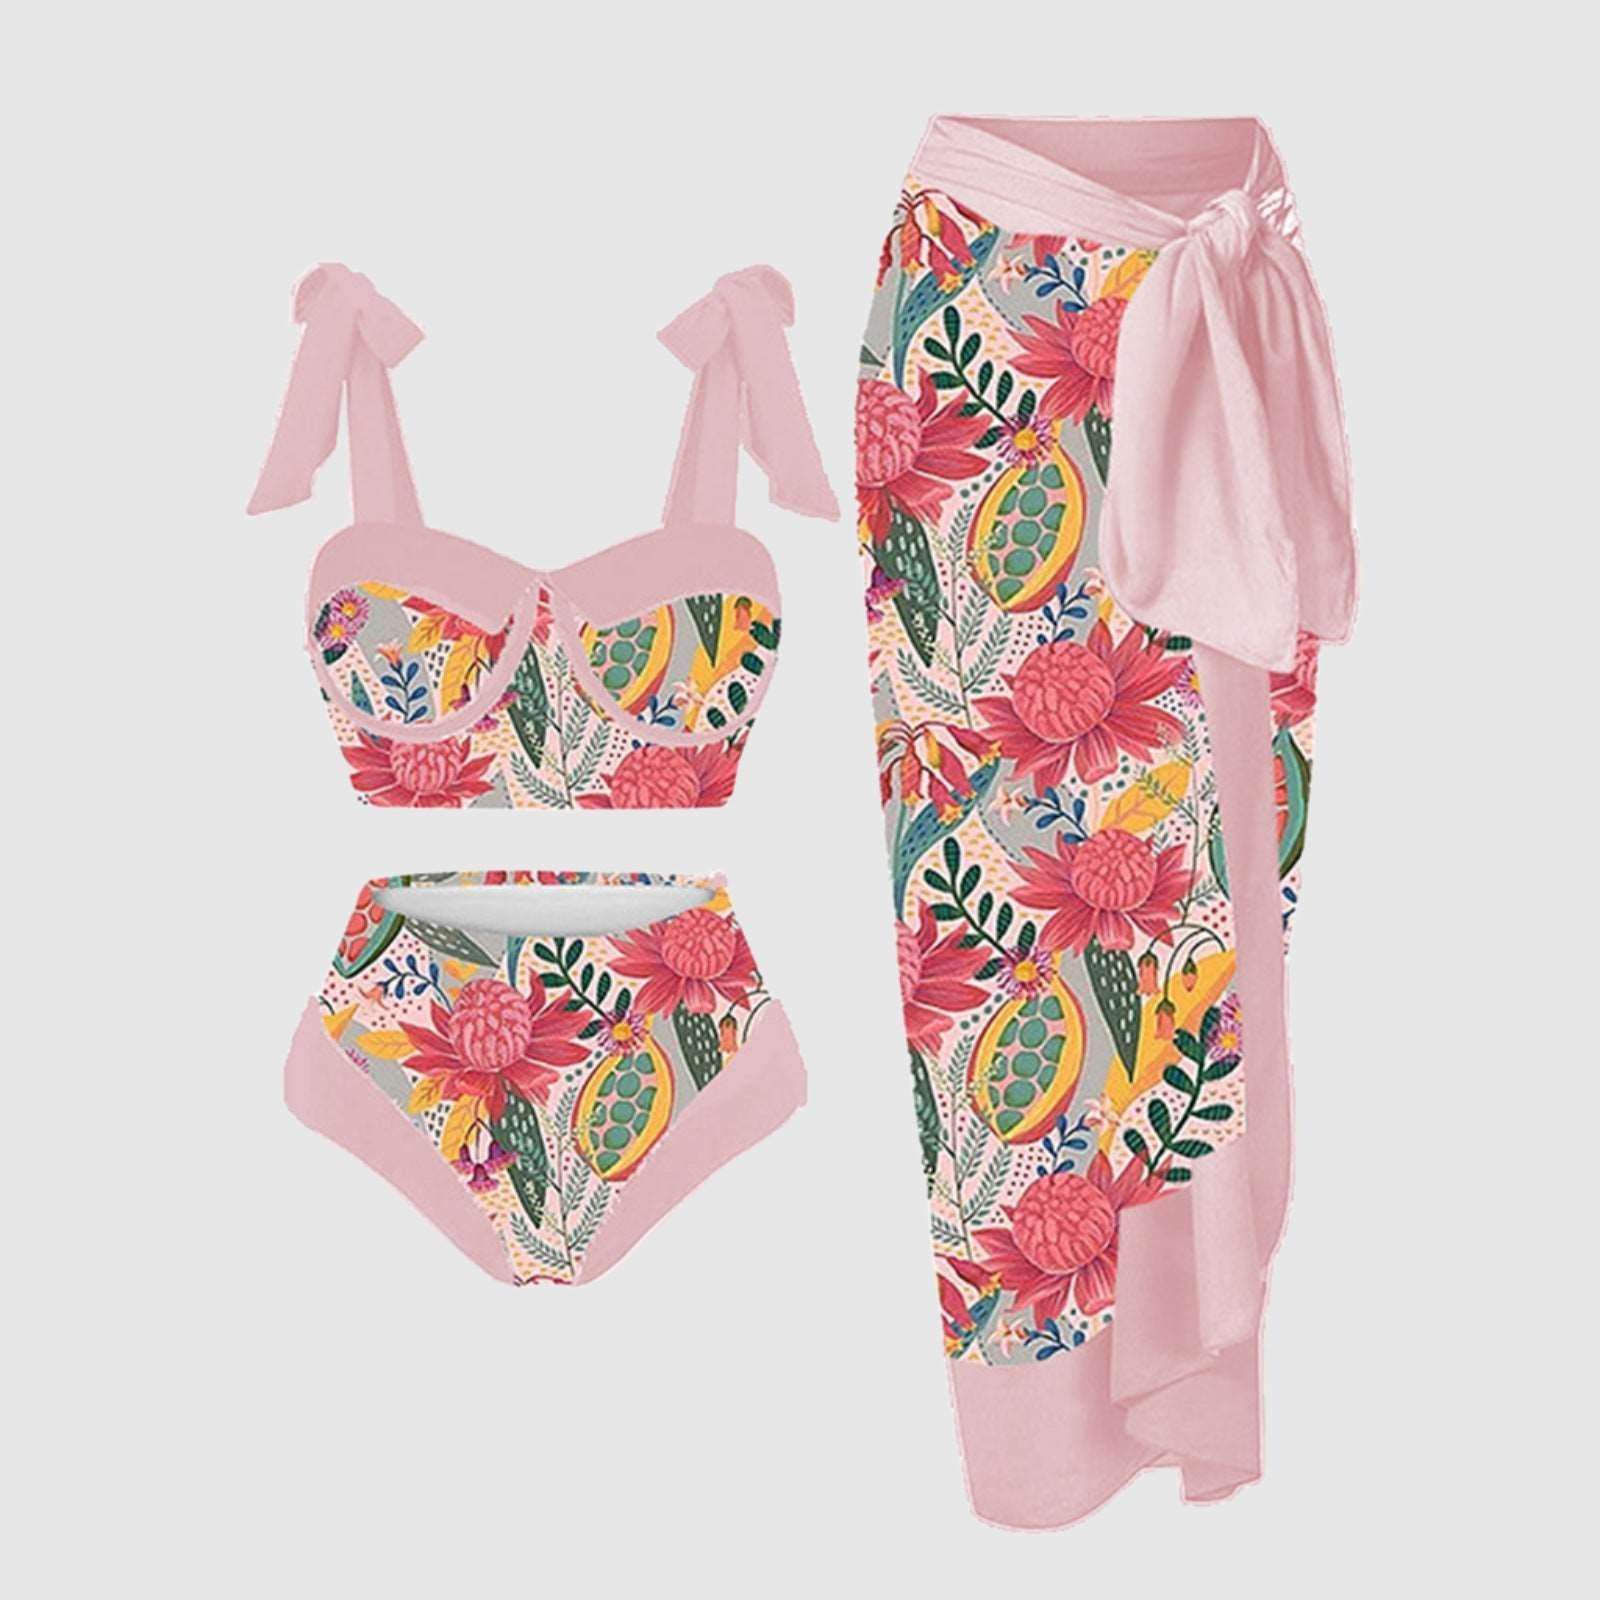 Women's Two-piece Swimsuit and Cover Scarf Set